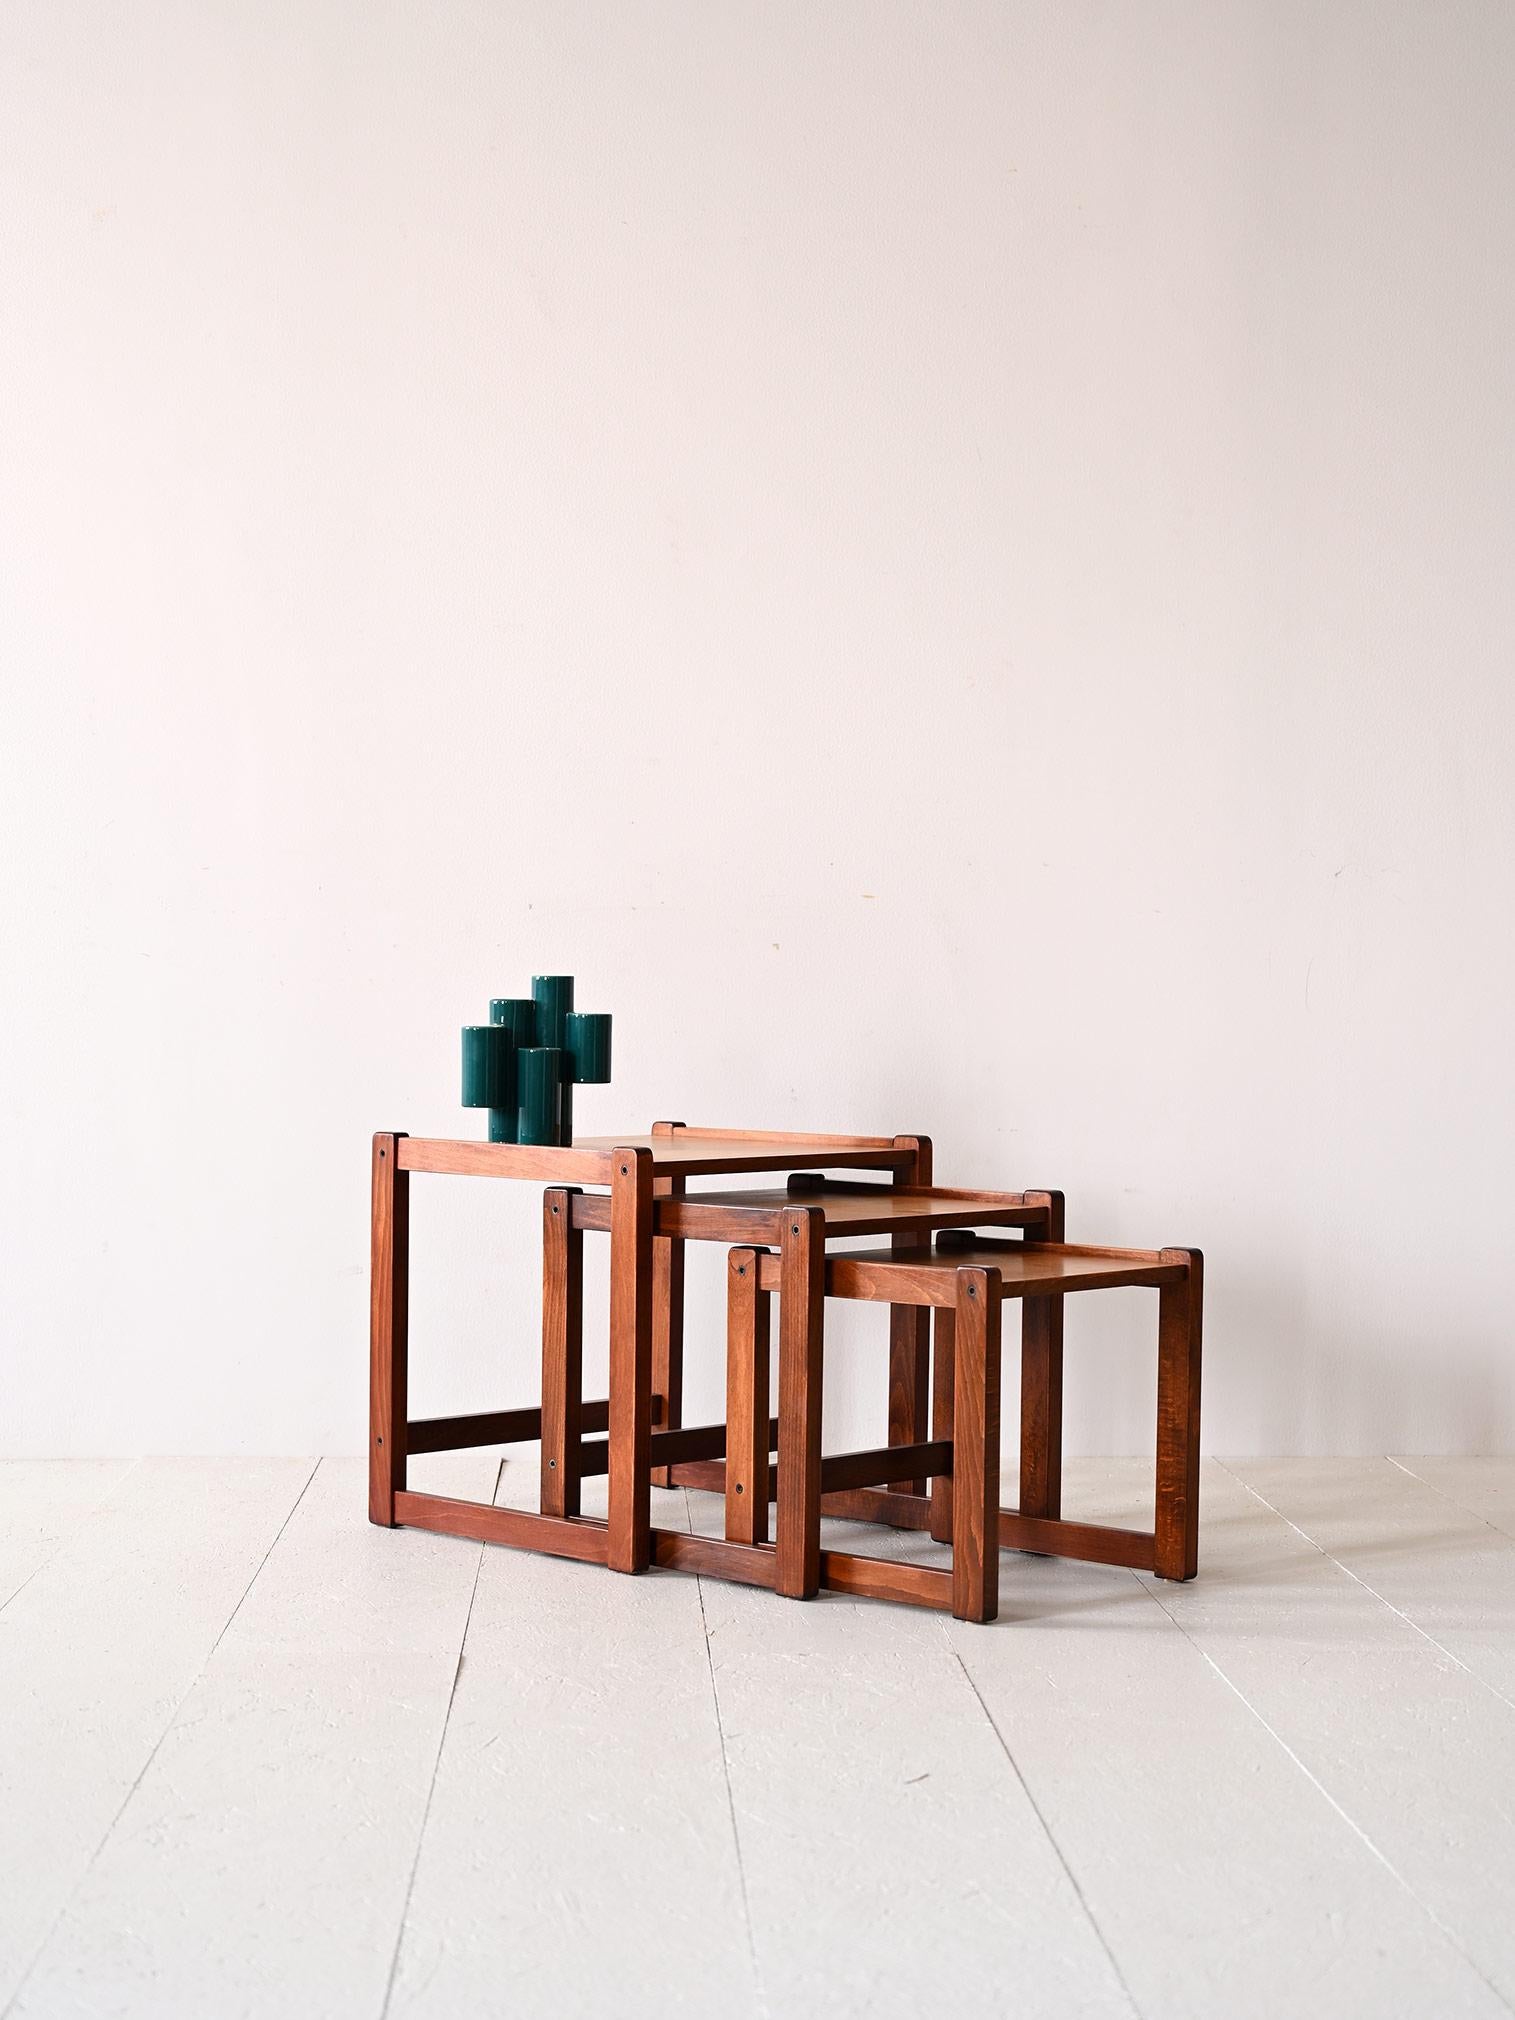 Original vintage 1960s Scandinavian side tables.

This set consisting of 3 coffee tables of different sizes that can be pulled out when needed, is distinguished by the square shape of the table tops and legs.
The essential and clean lines make them